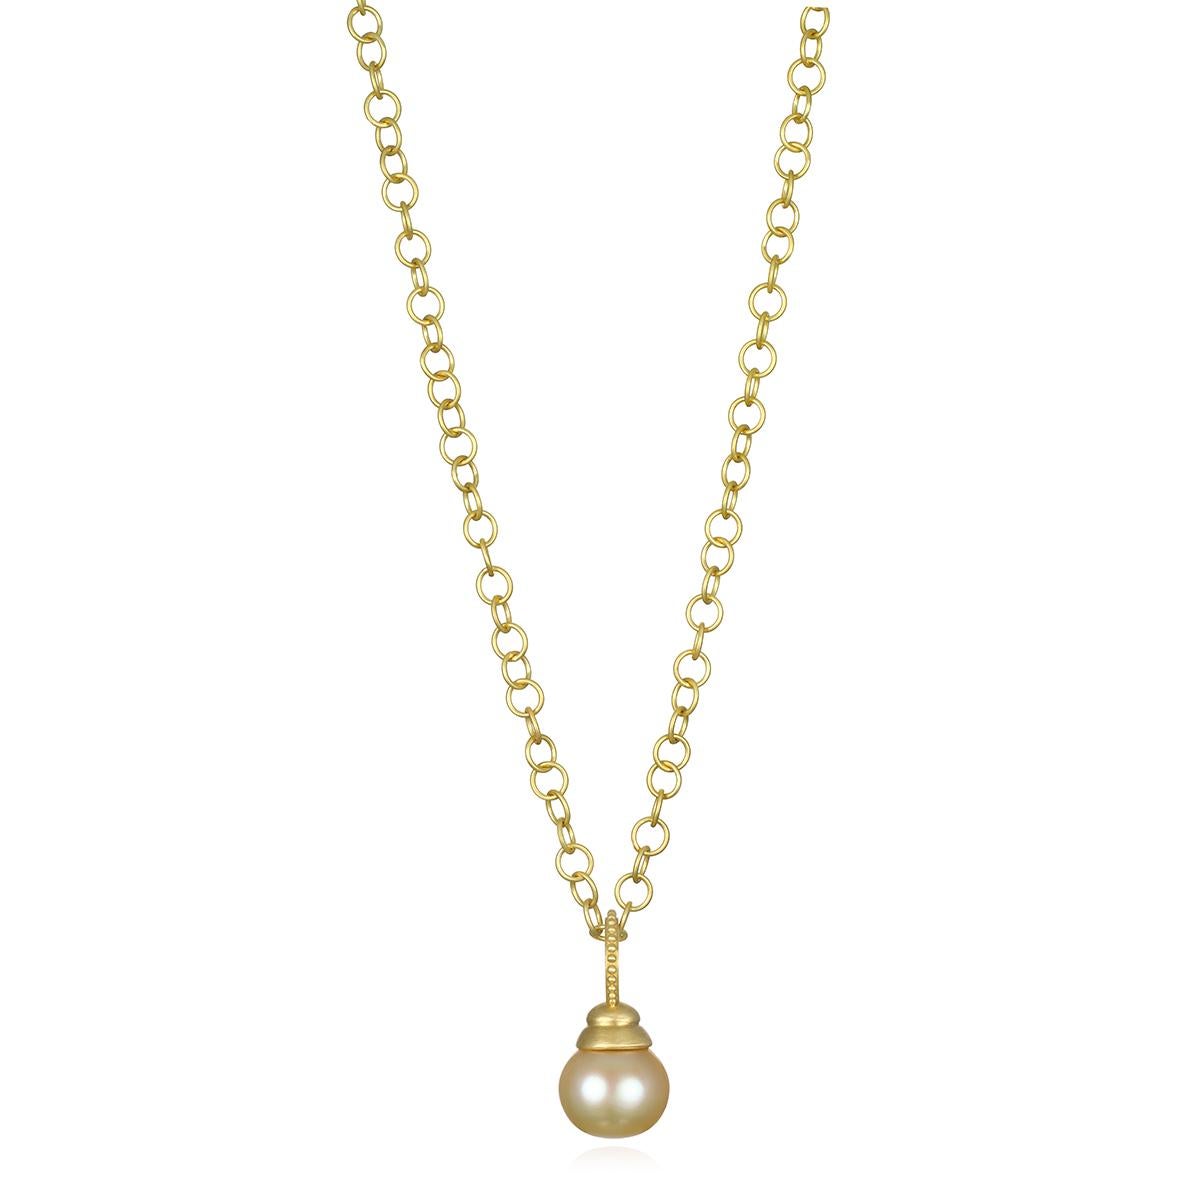 This beautiful Faye Kim Golden South Sea Pearl Pendant is both lustrous and classic. The pendant's modern design, with its double cap and granulation bail, conveys understated elegance and a truly stylish, everyday look and is perfect for layering